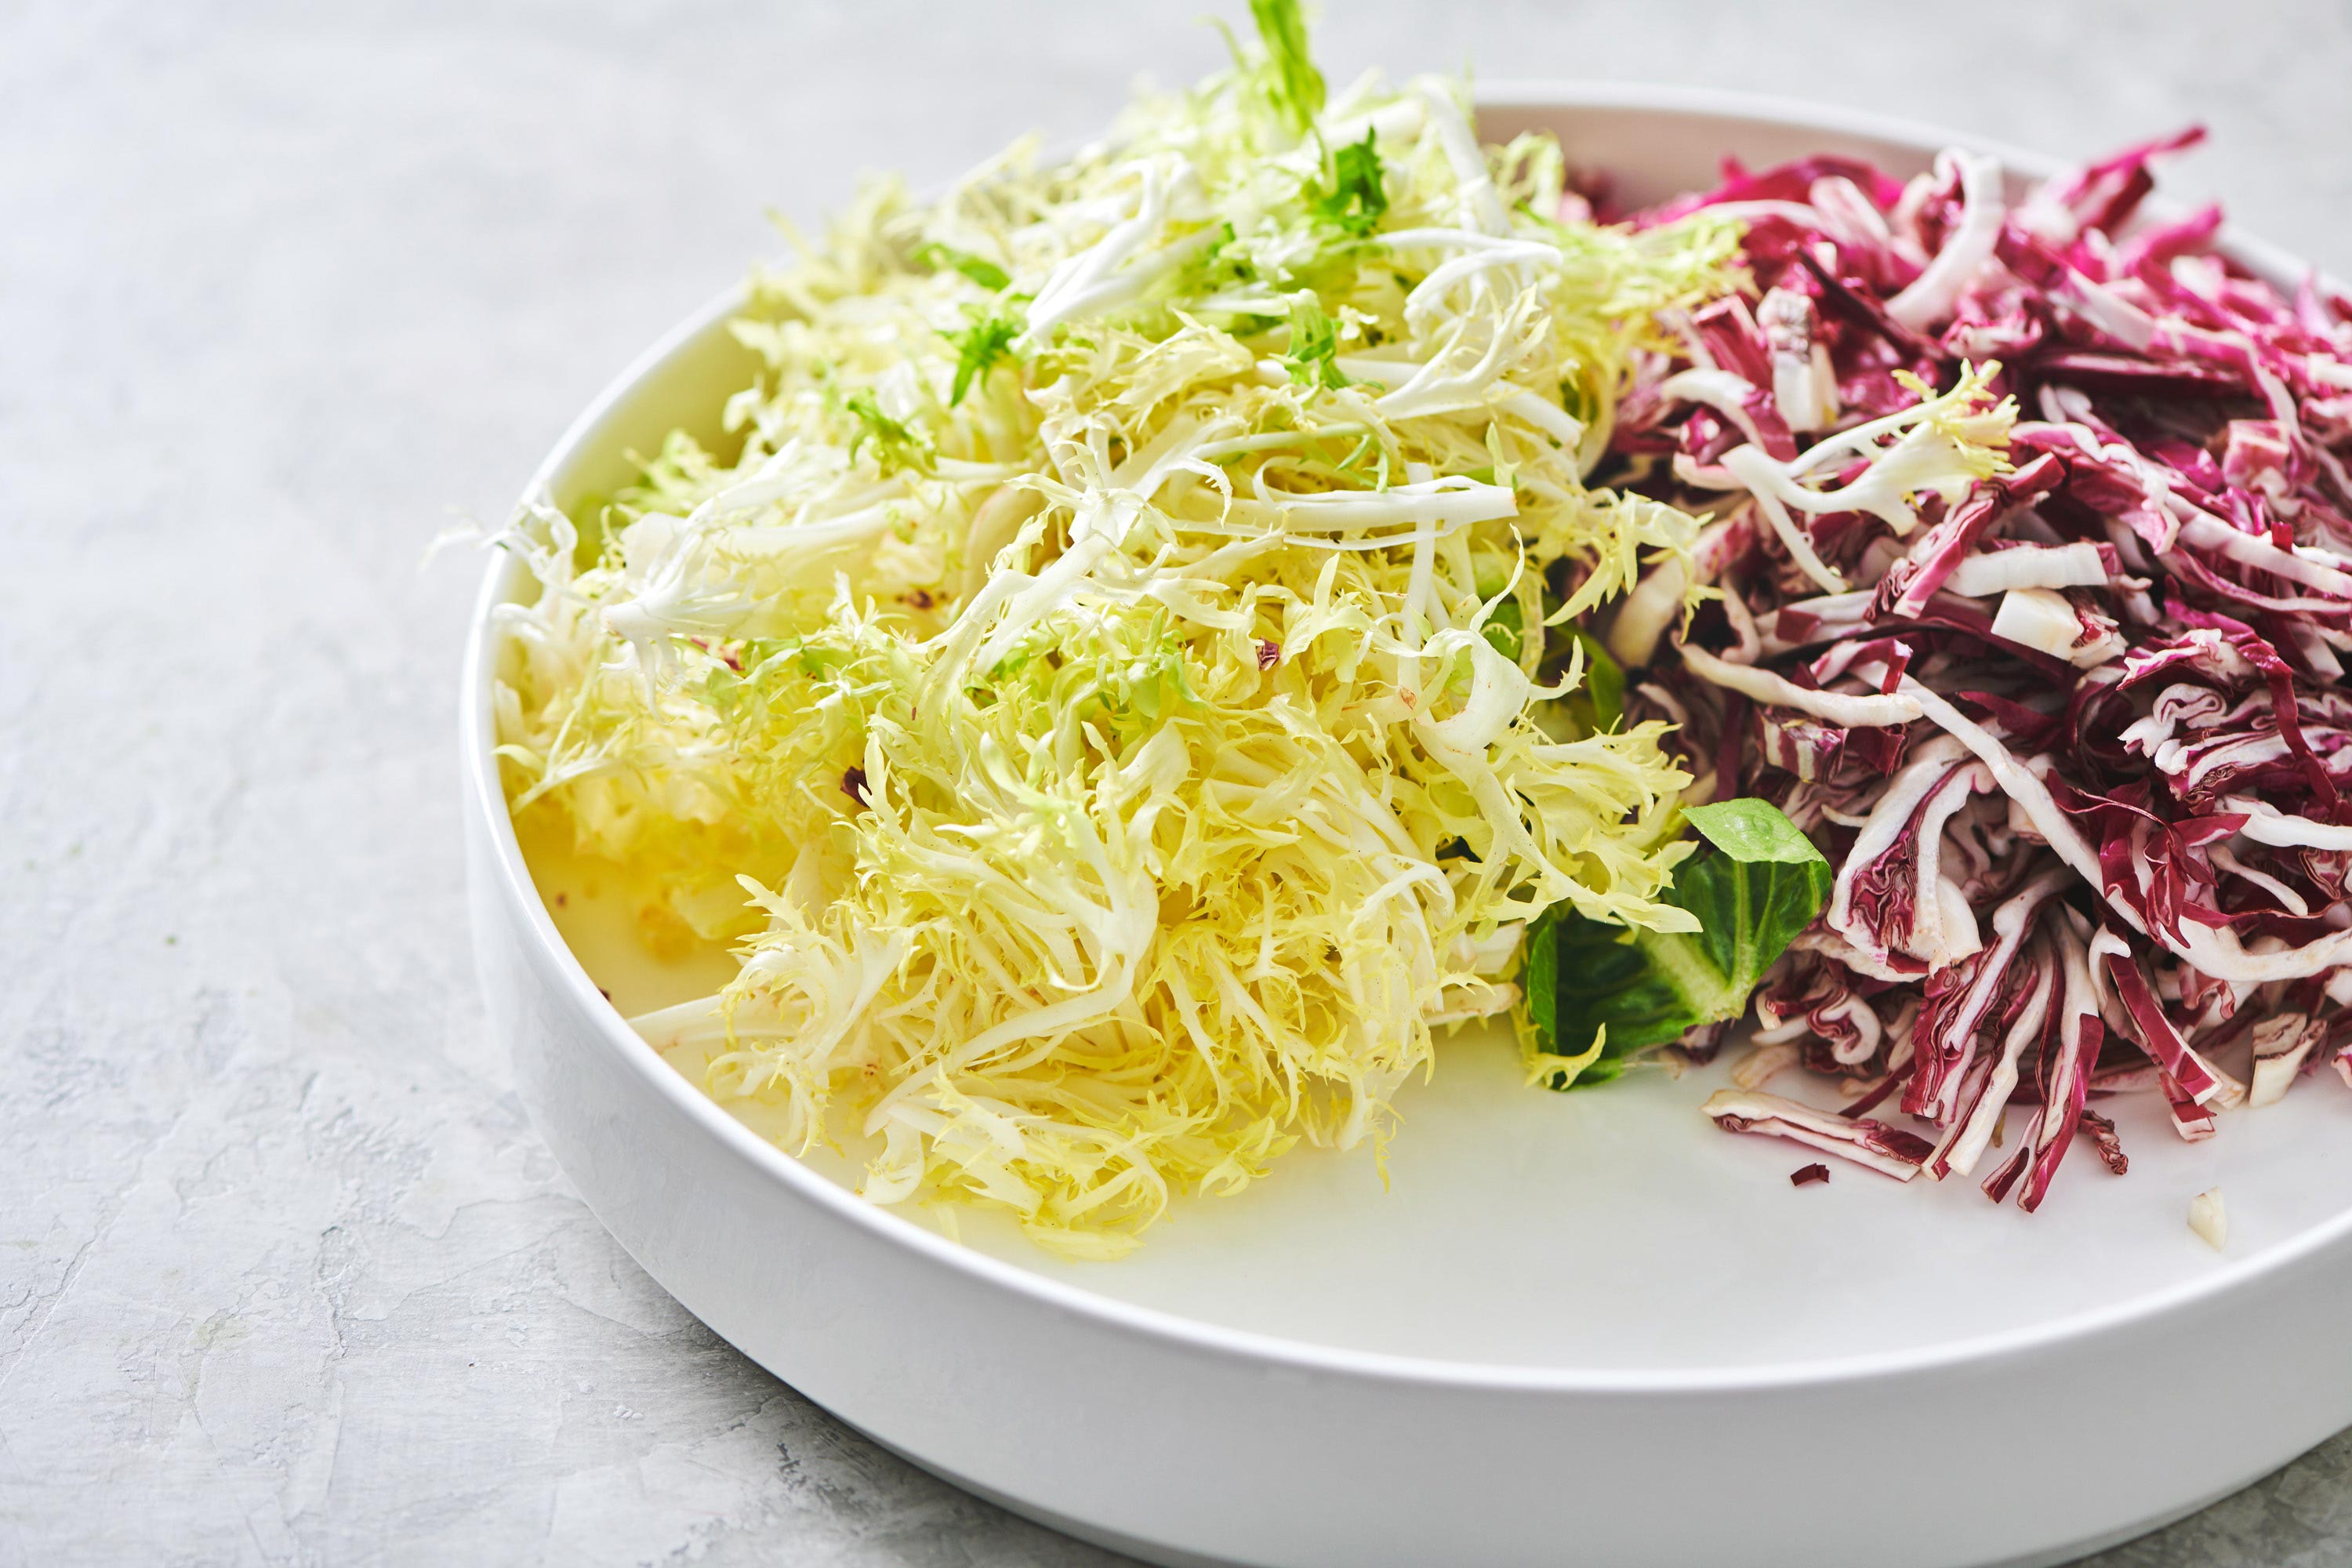 Thinly sliced Frisee lettuce on a plate with radicchio.